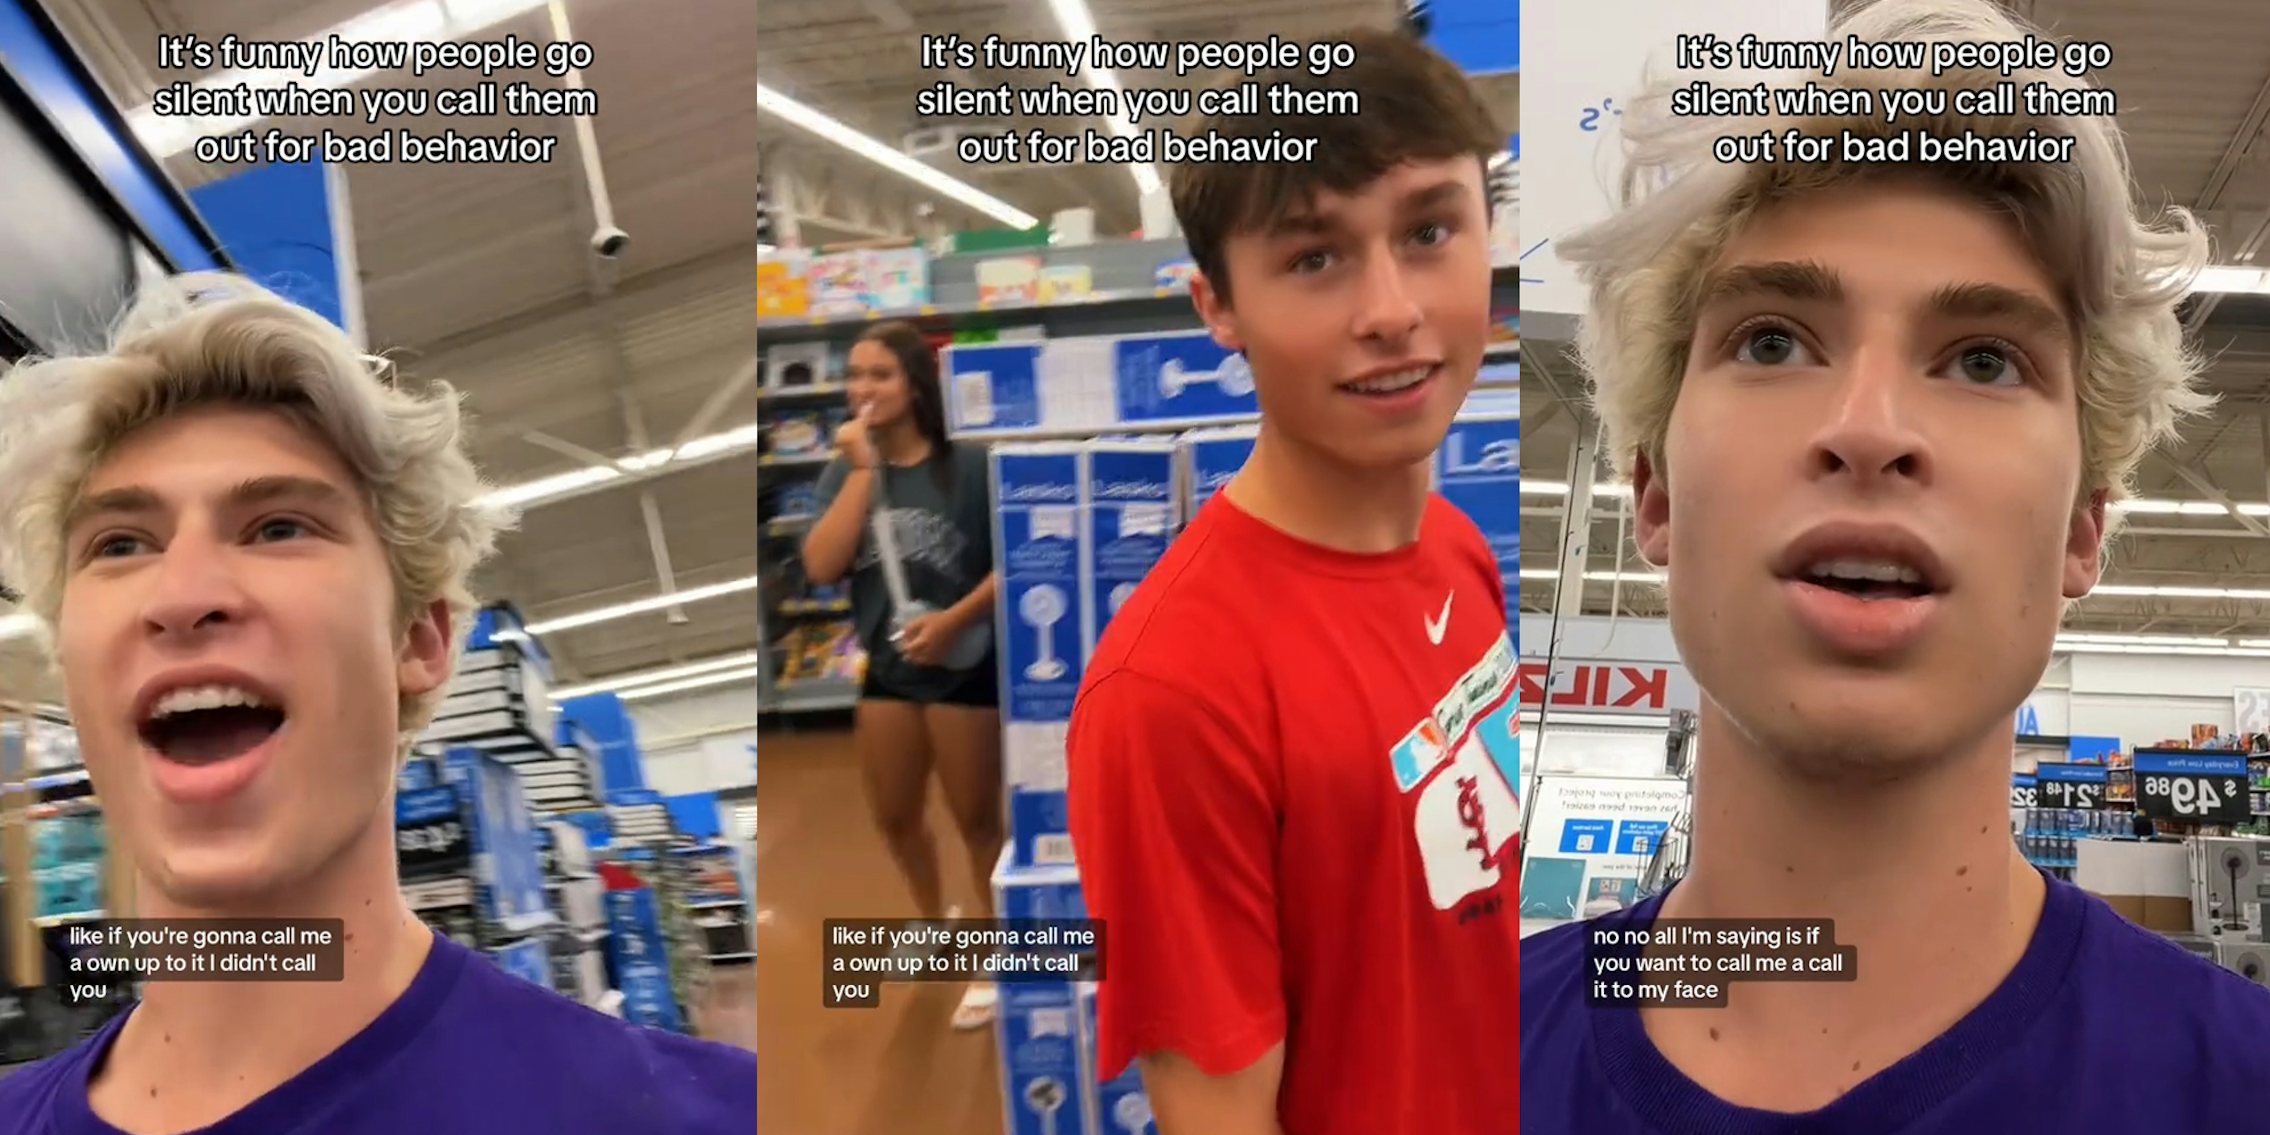 man speaking in Walmart with caption 'It's funny how people go silent when you call them out for bad behavior' 'like if you're gonna call me a own up to it! I didn't call you' (l) man speaking in Walmart with caption 'It's funny how people go silent when you call them out for bad behavior' 'like if you're gonna call me a own up to it! I didn't call you' (c) man speaking in Walmart with caption 'It's funny how people go silent when you call them out for bad behavior' 'no no all I'm saying is if you want to call me a call it to my face' (r)